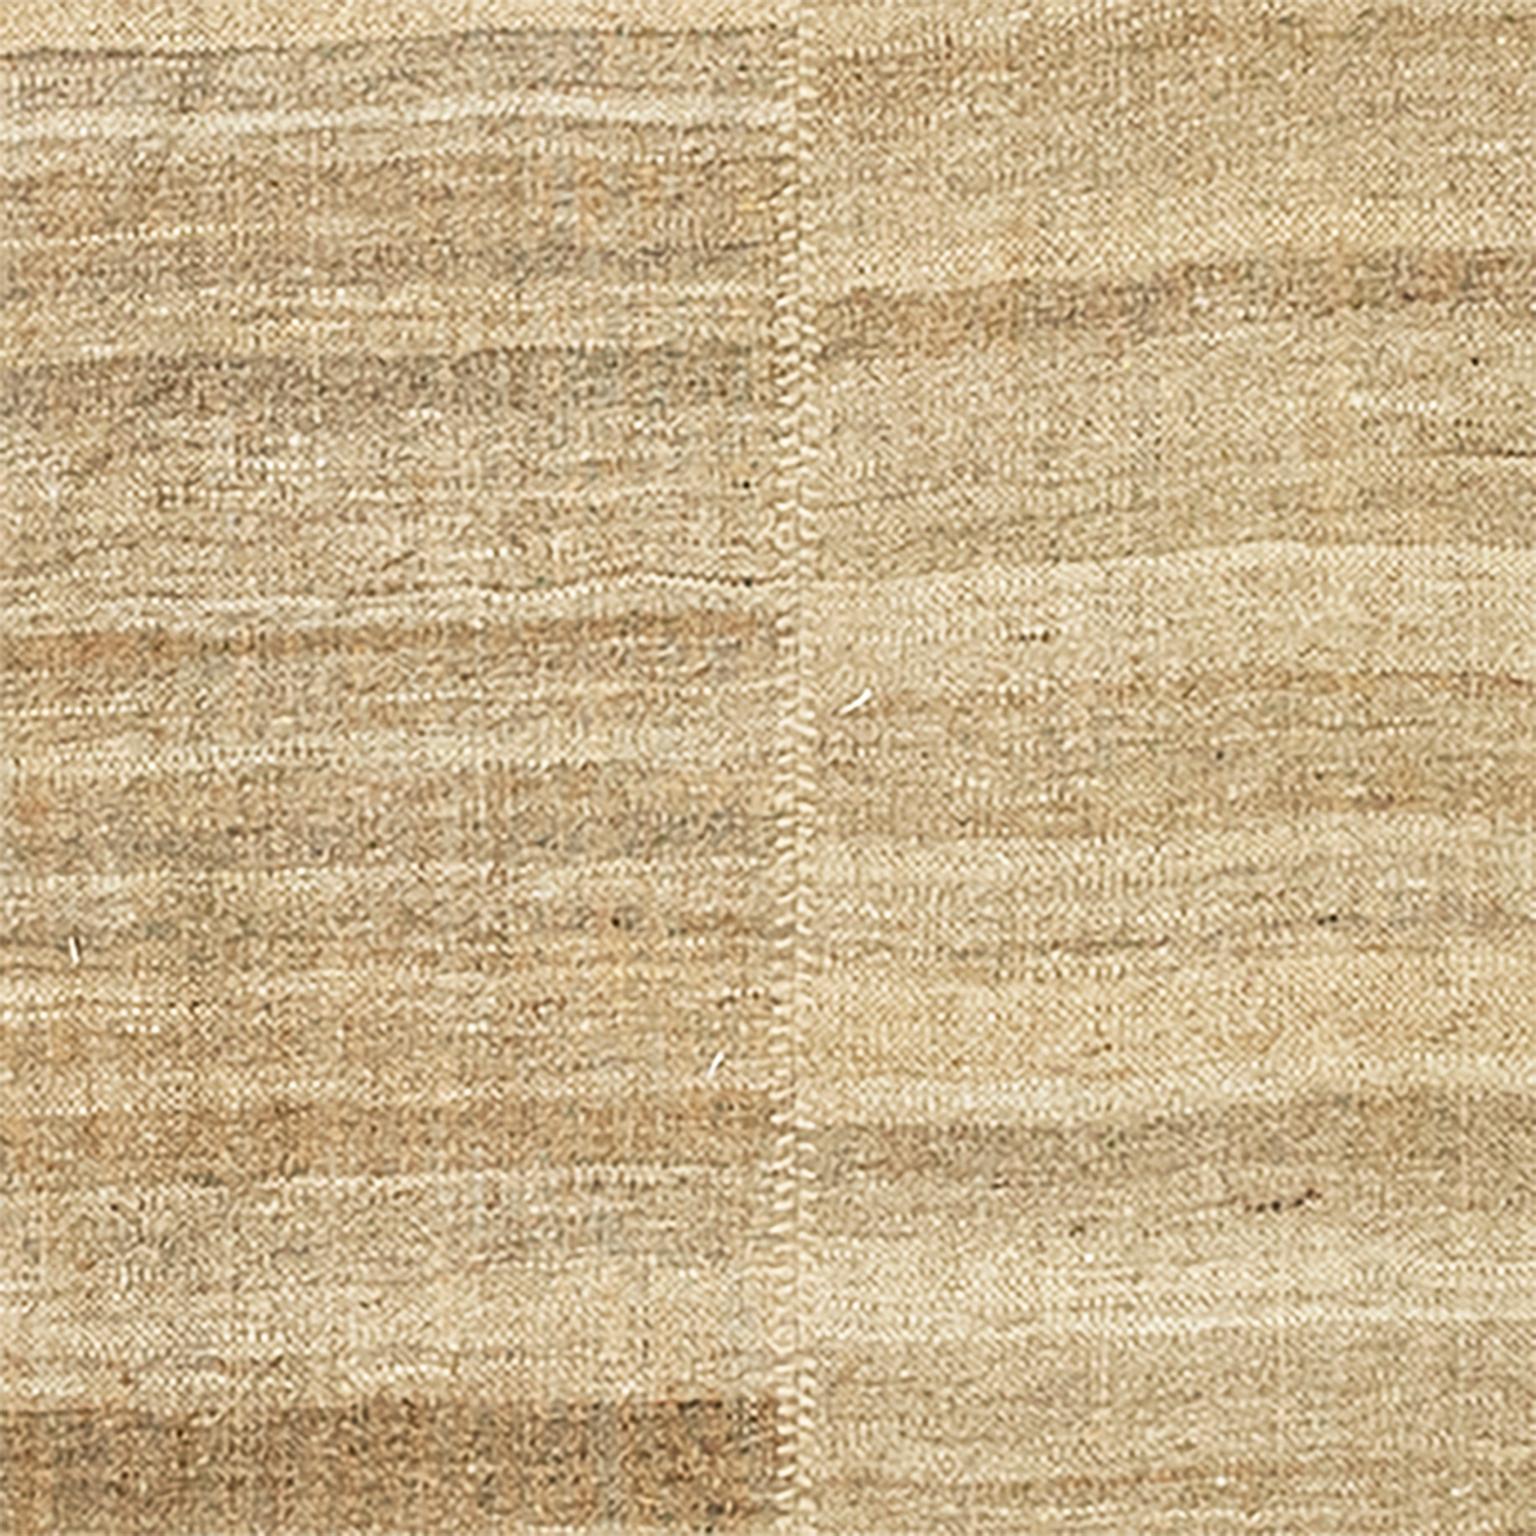 - Undyed natural wool
- Colors are beige, brown, camel, gray
- Vintage panels from 1940 are joined together to create one piece.